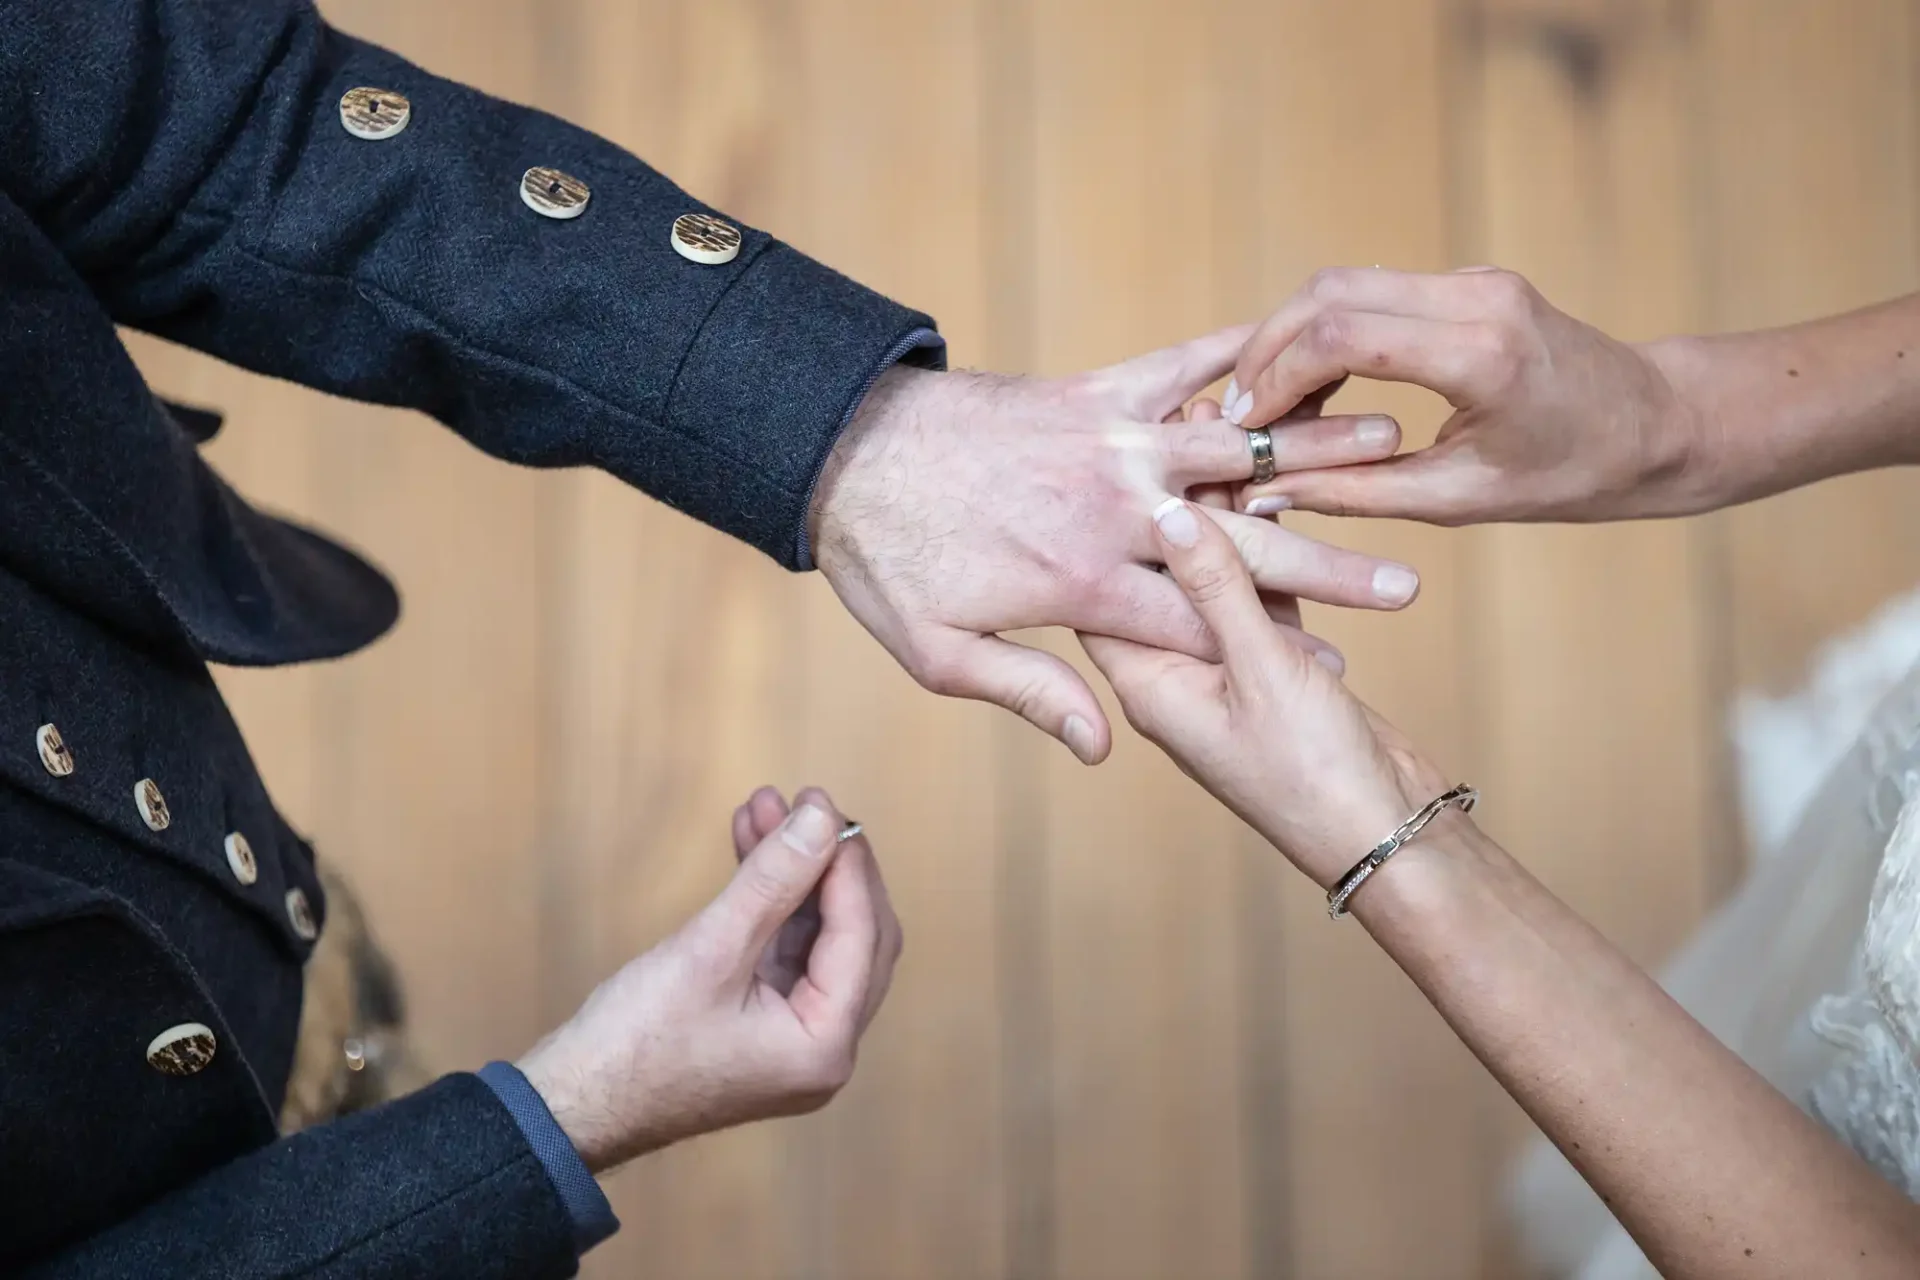 Wedding photography photos: A close-up of a couple exchanging wedding rings. The person on the left is wearing a dark suit, while the person on the right is wearing a bracelet.